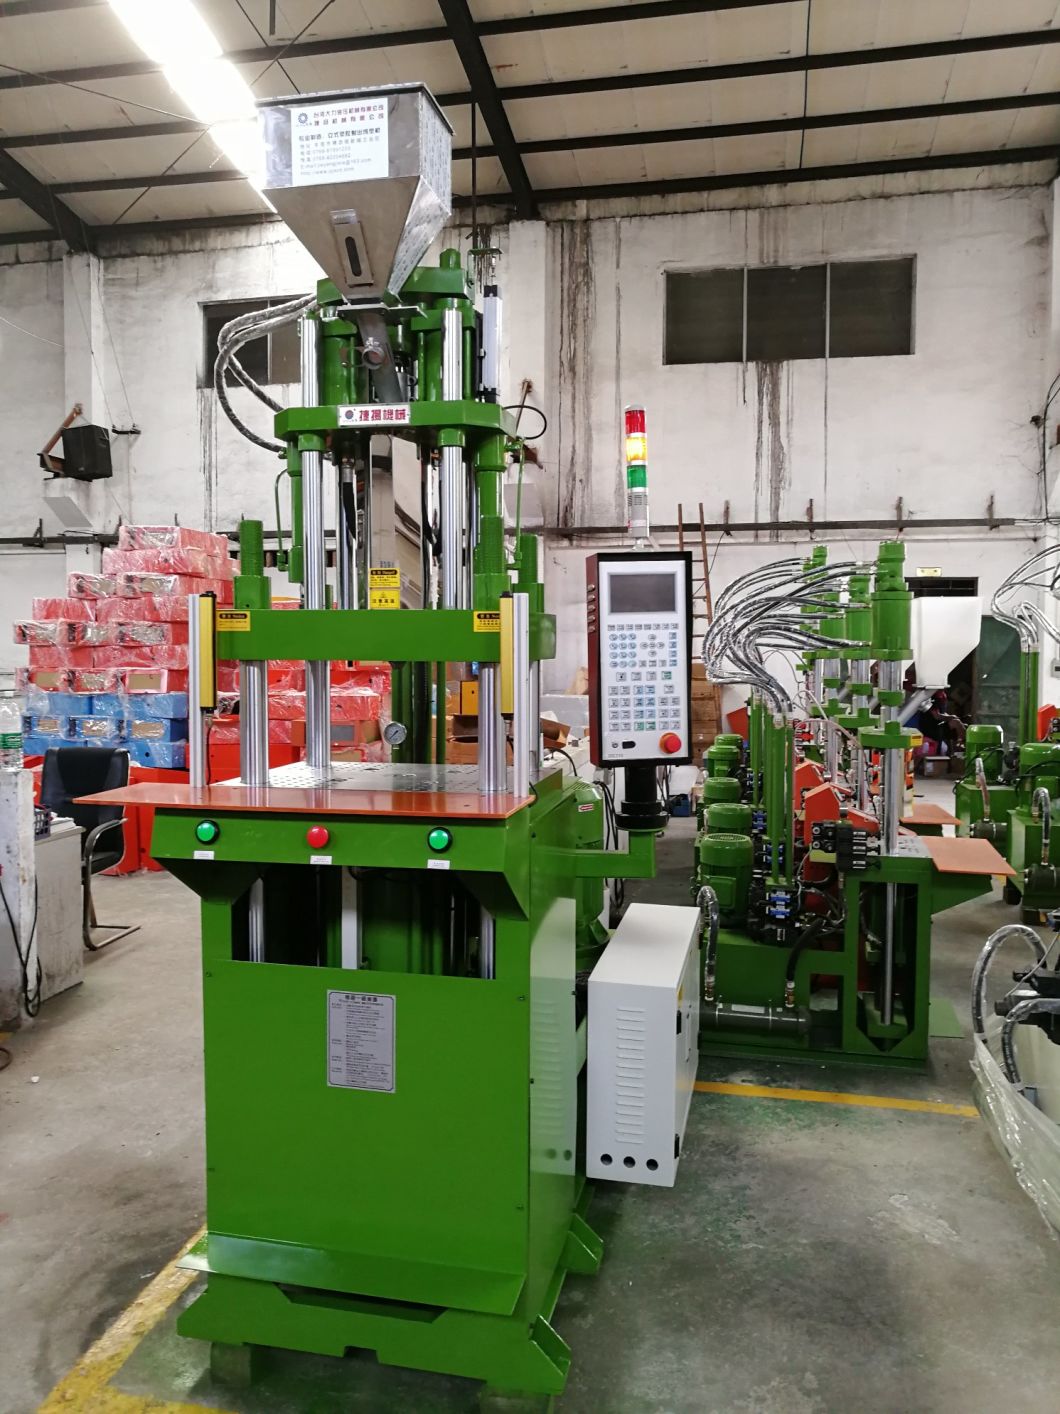 Injection Molding Machine for Making Plastic Pipe/Handle/Glasses Frames